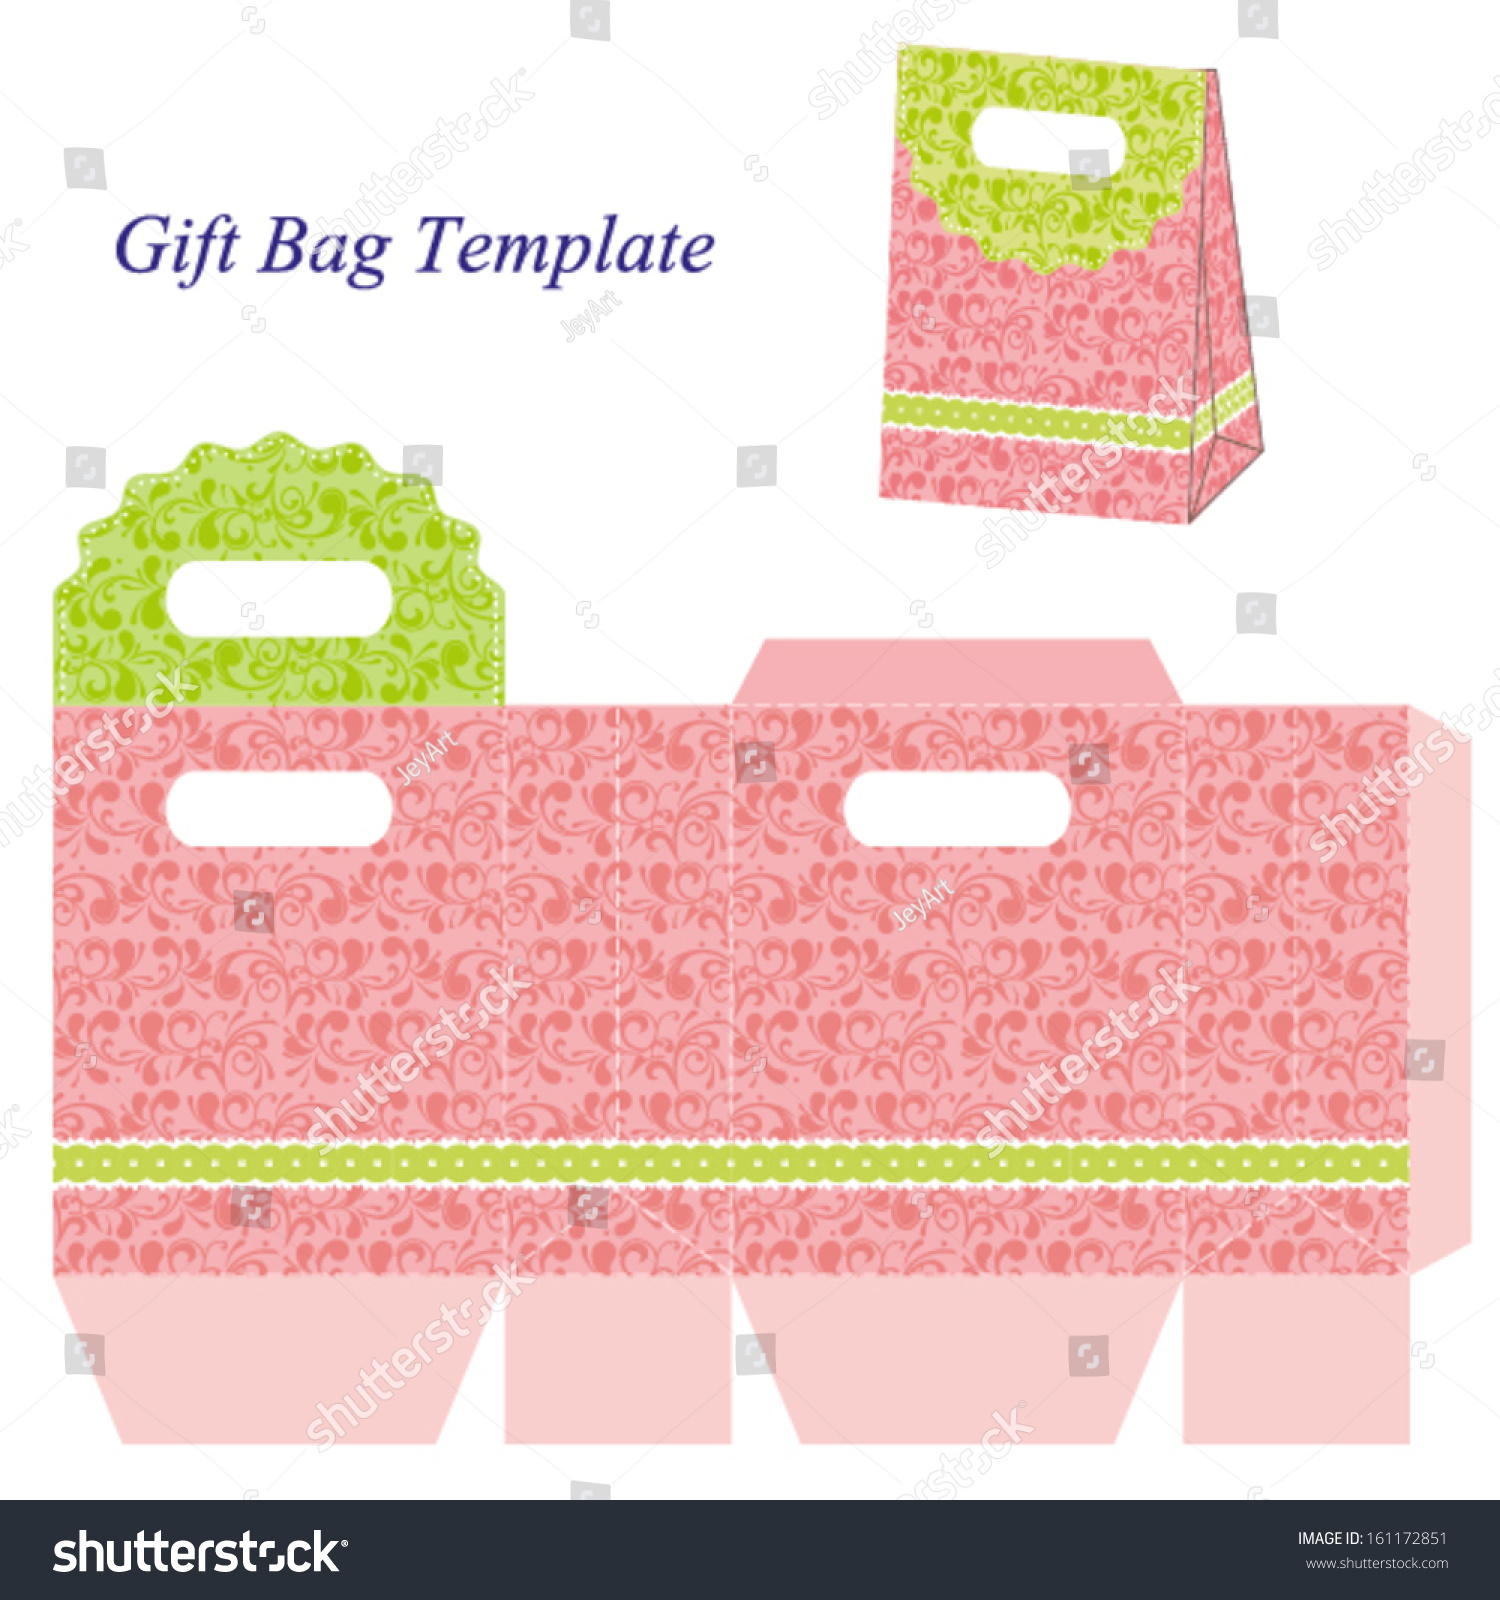 Pink Gift Bag Template With Floral Pattern. Vector Illustration ...